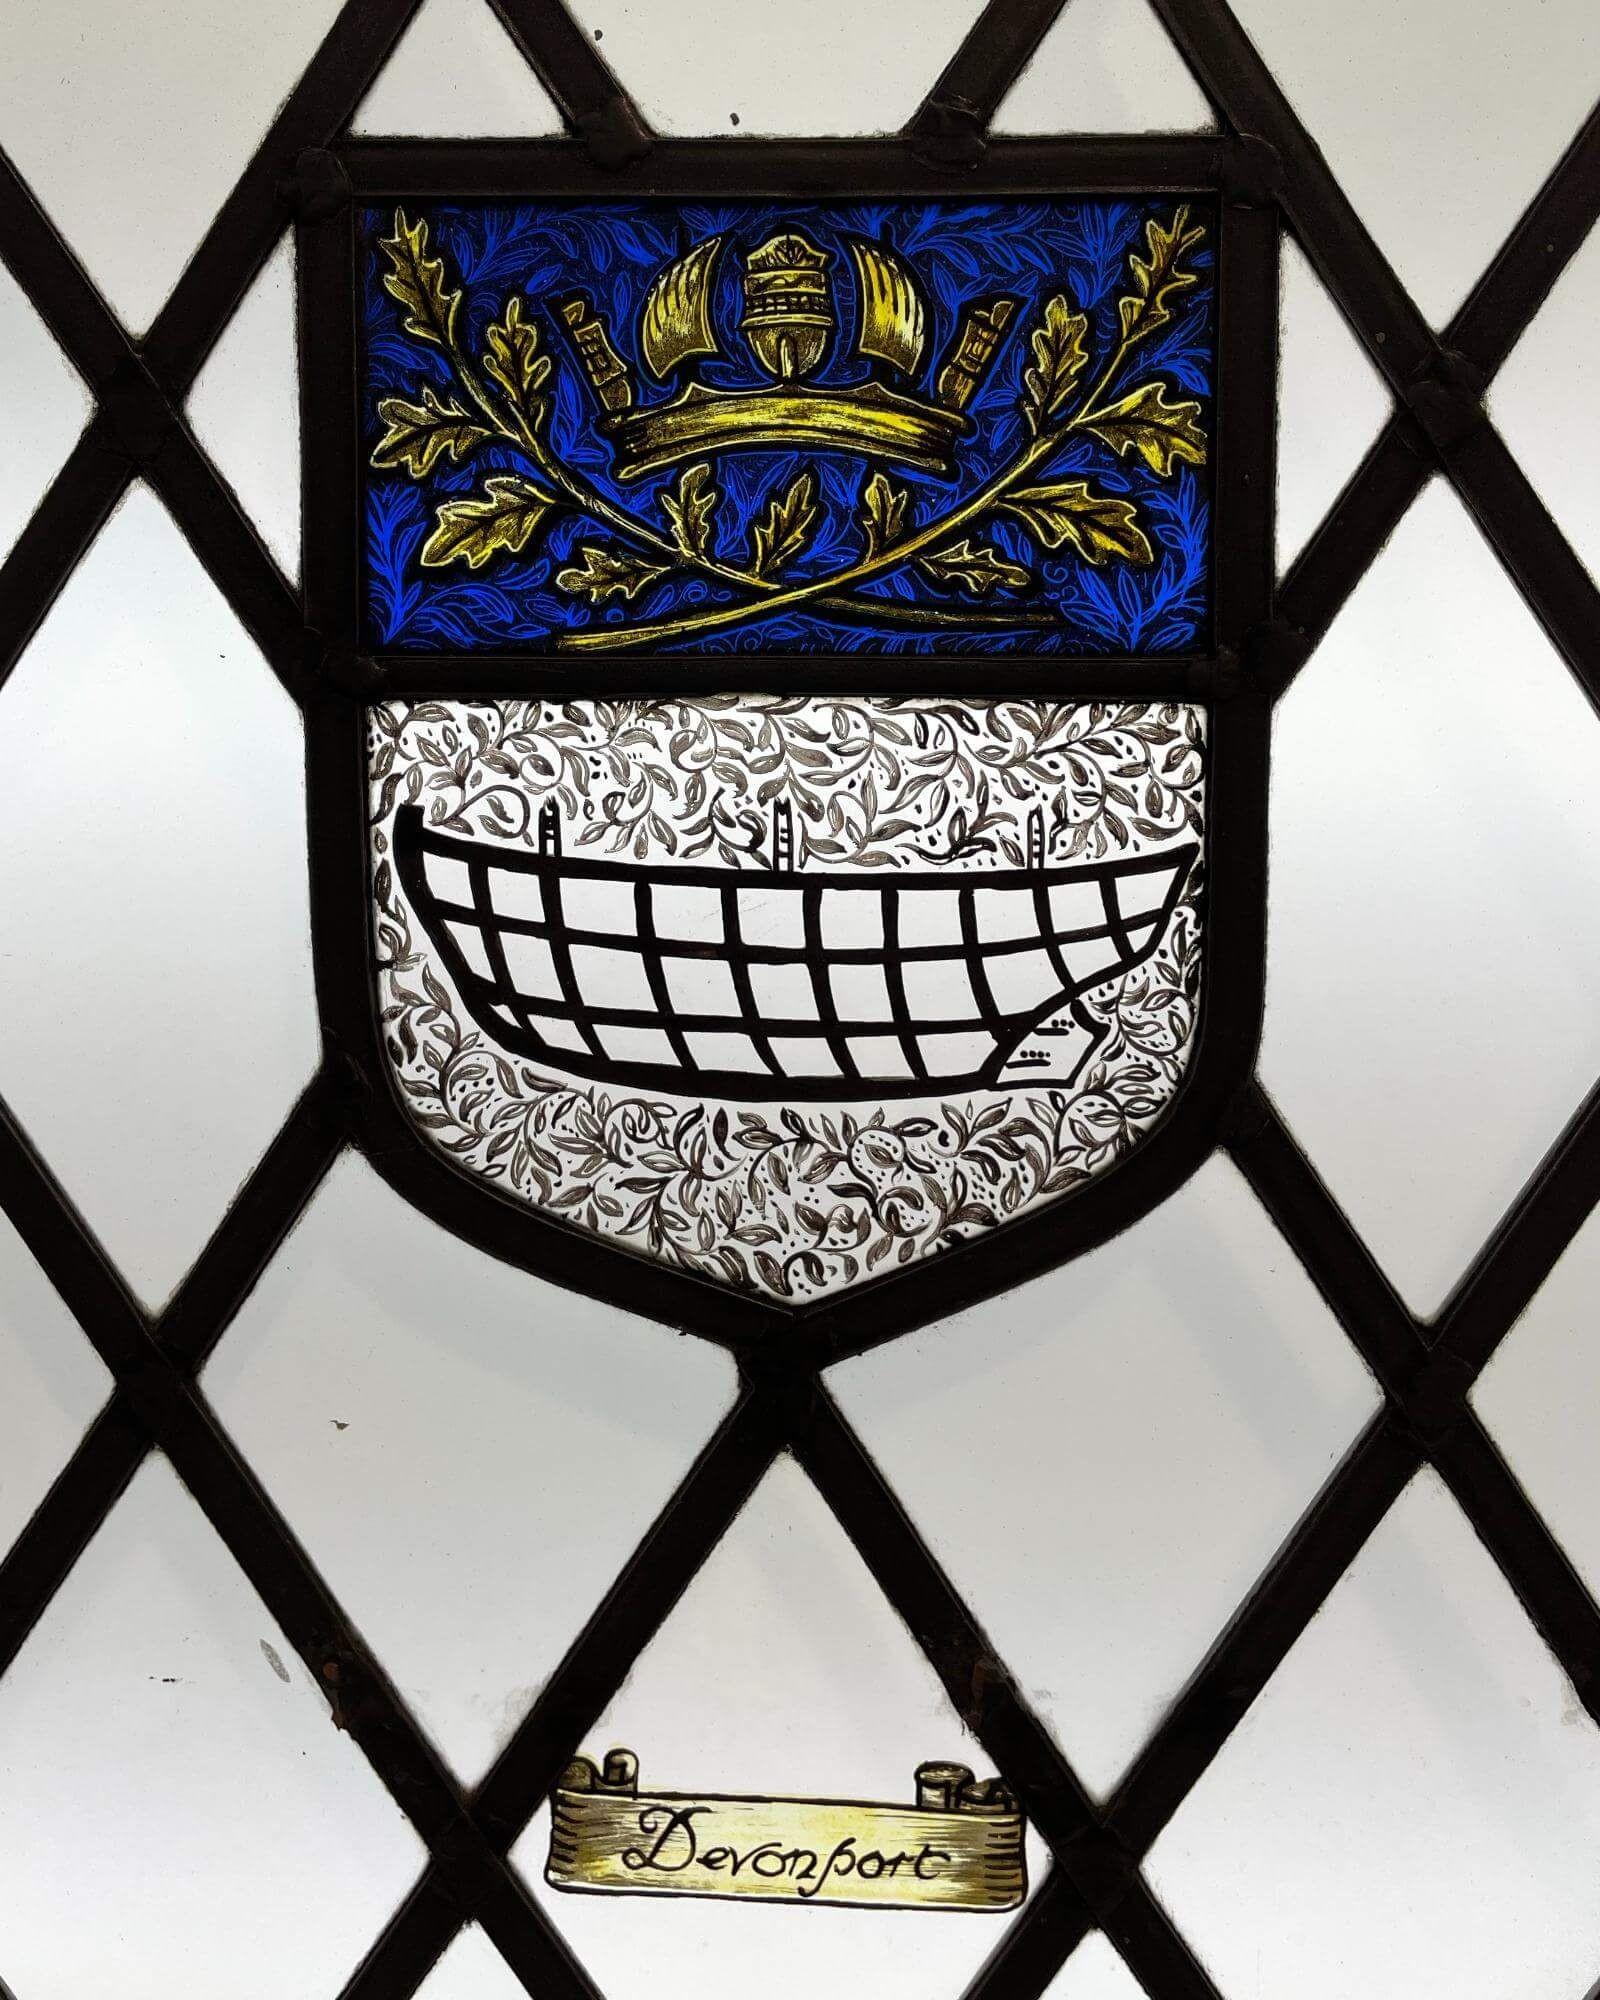 An early 20th century antique English stained glass window detailed with the Devonport Coat of Arms. This stained glass window is one of a series of panels we are selling from towns and cities on the south coast of the British Isles.

The Devonport